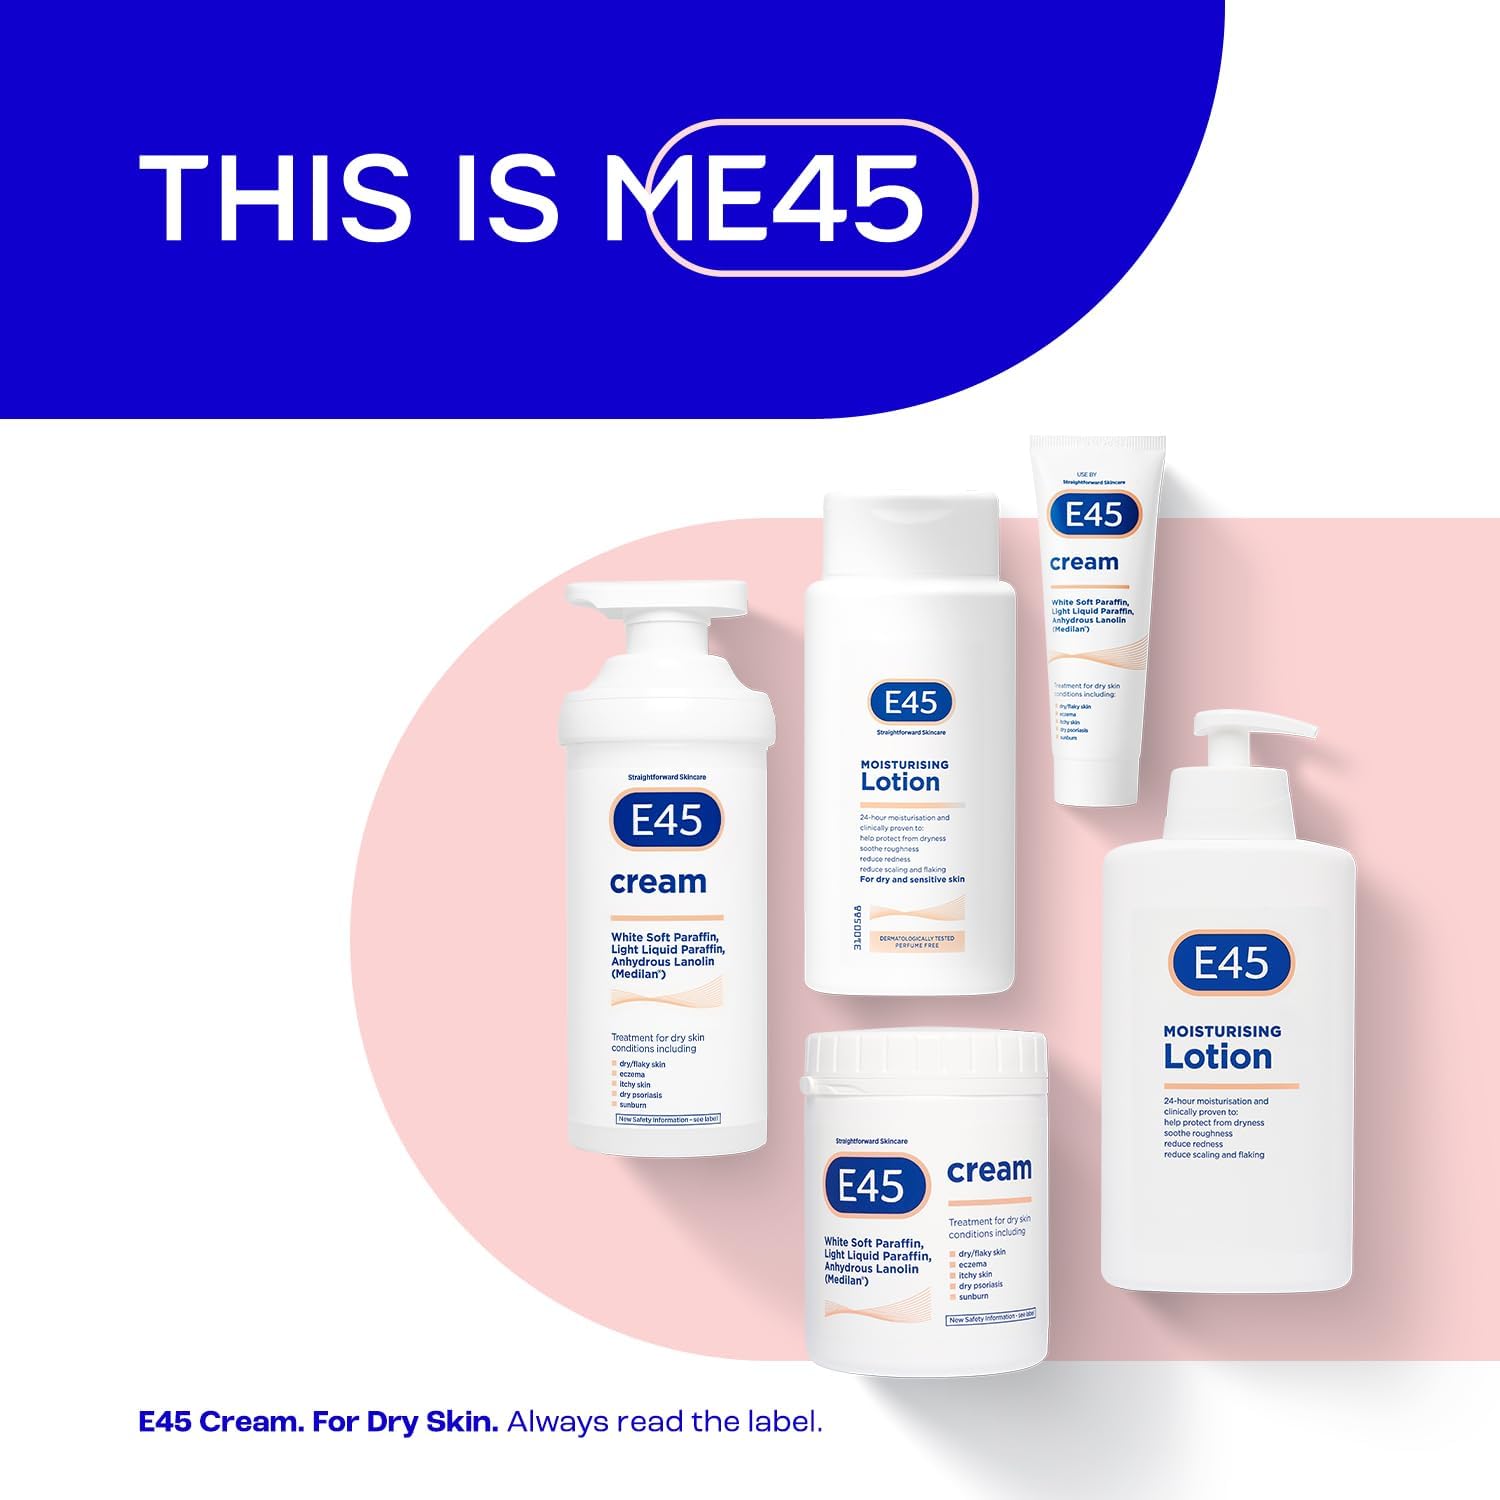 E45 Cream 500 g Tub – Moisturiser for Dry Skin and Sensitive Skin - Emollient Body Cream to Soothe Dry and Irritated Skin - Itchy Skin, Eczema Cream - Perfume-Free Face Cream and Non-Greasy Hand Cream : Amazon.co.uk: Beauty